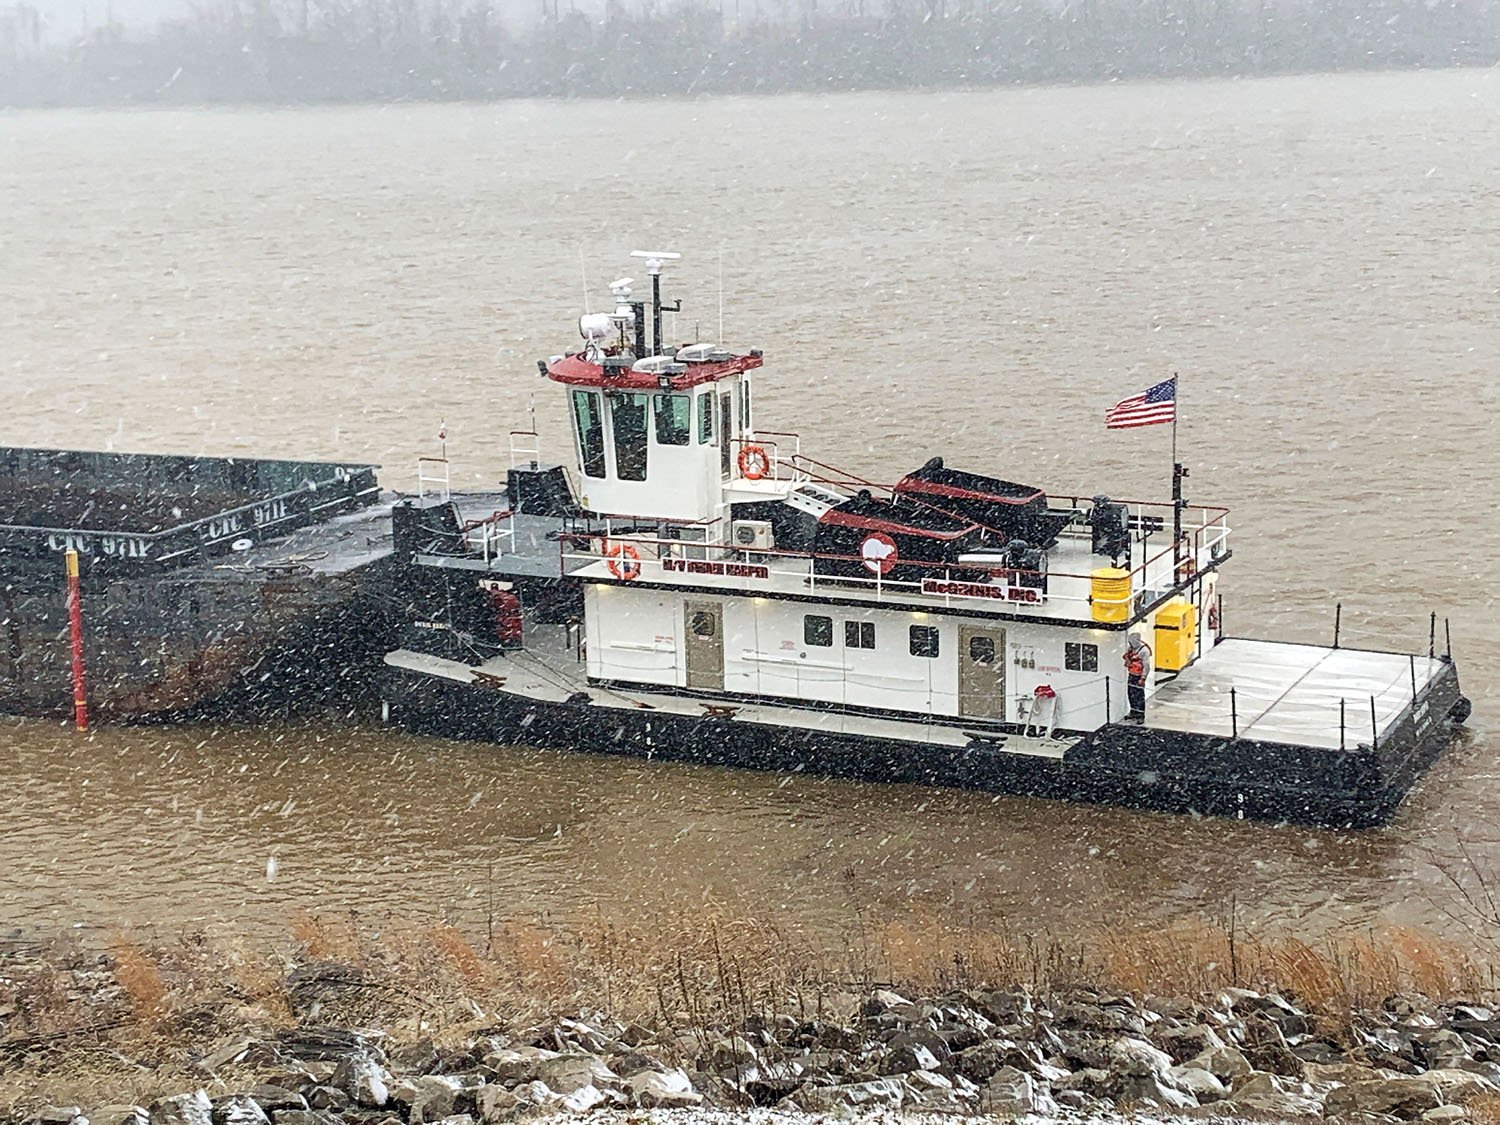 Dwain Harper towboat on the water